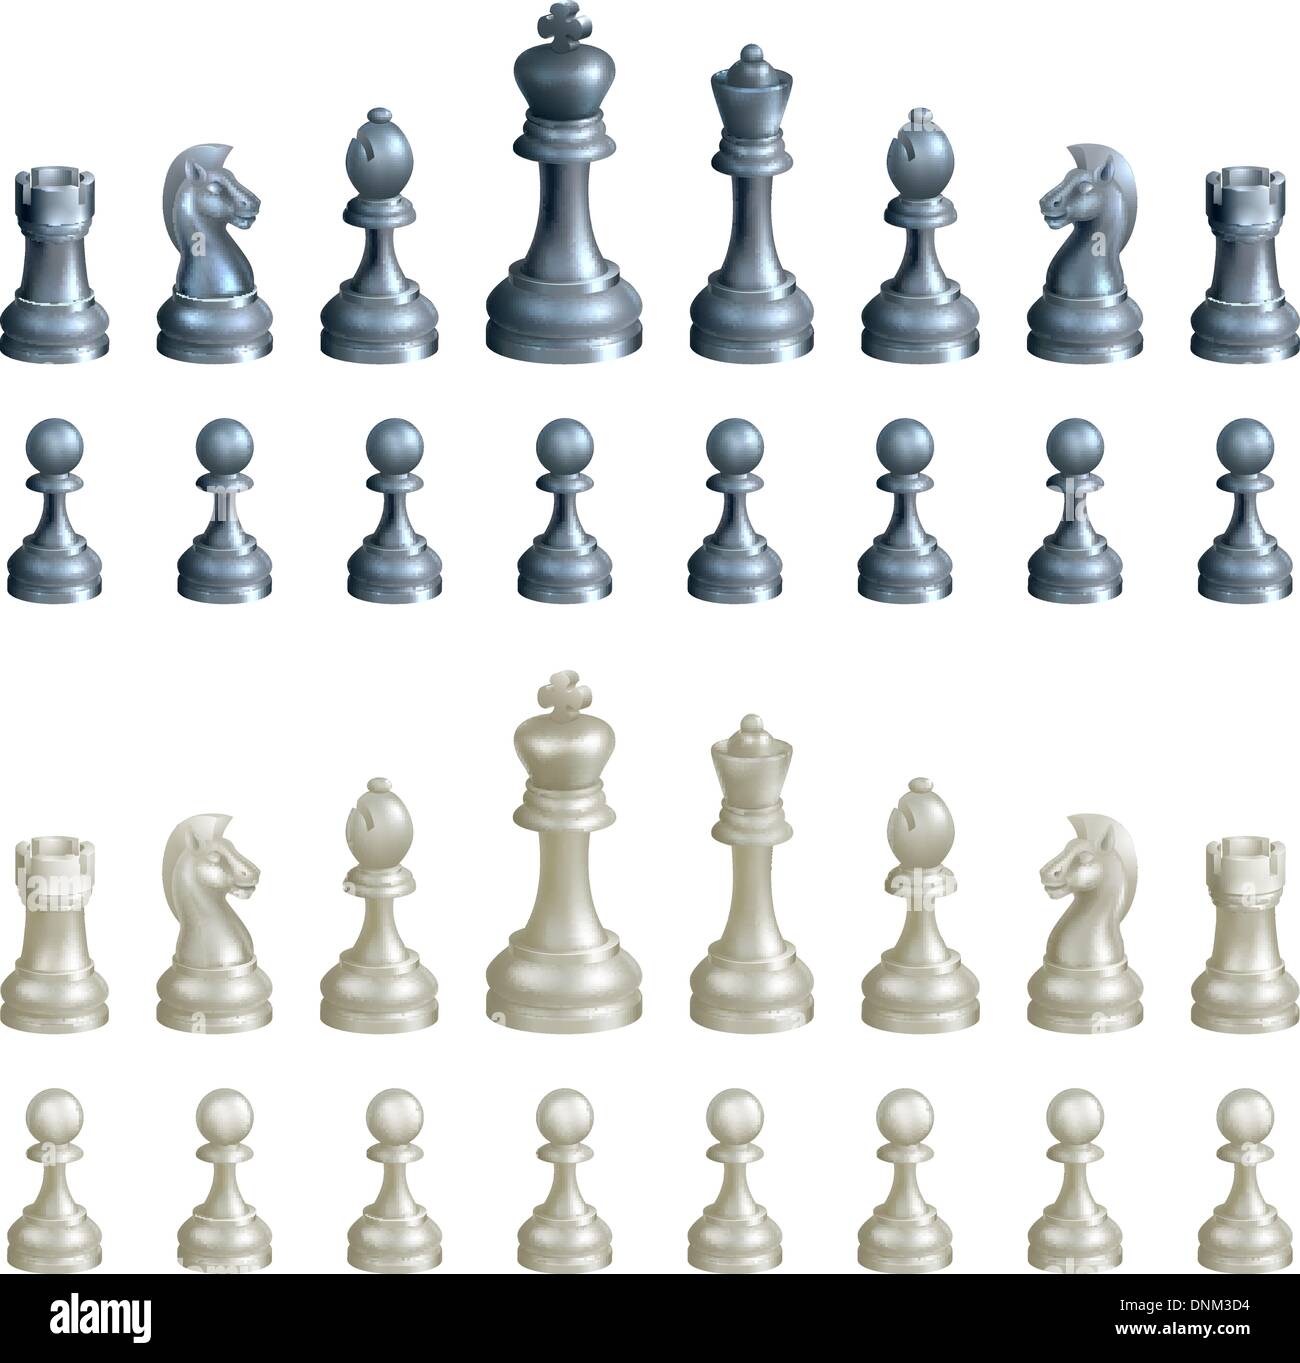 An illustration of a complete set of chess pieces in black and white Stock Vector